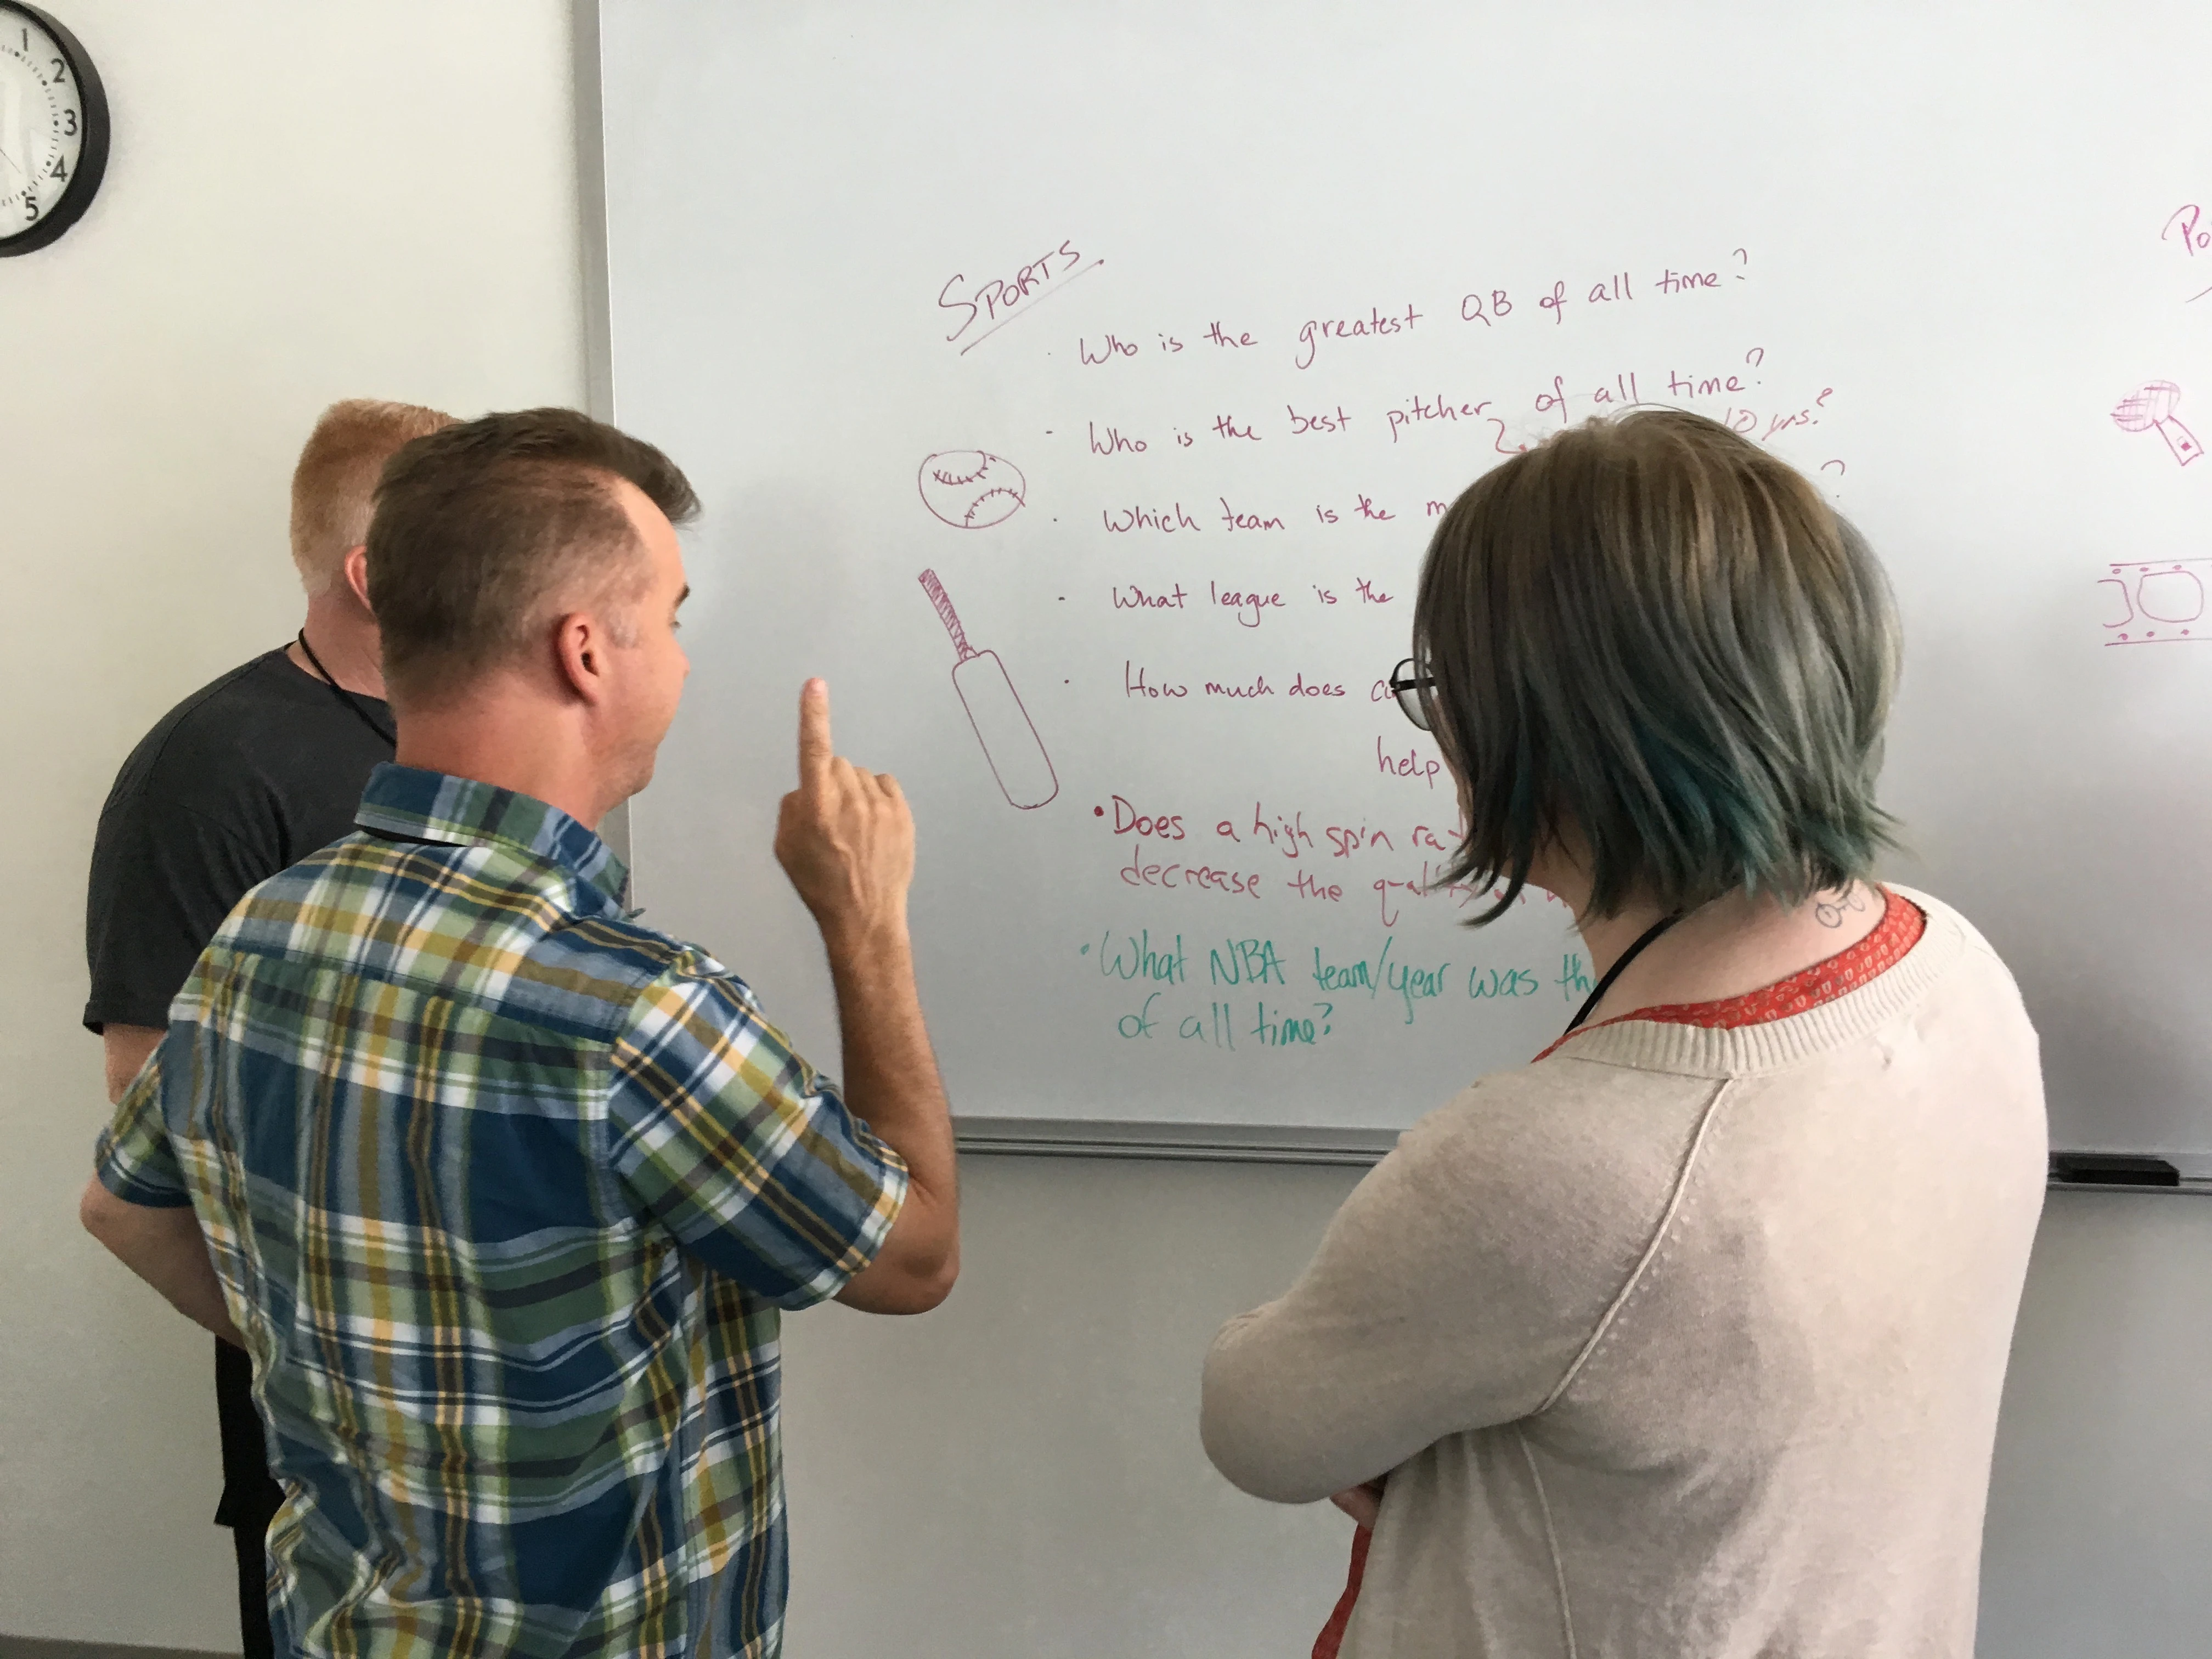 A mentor and two students analyze important data science key takeaways at a classroom whiteboard.